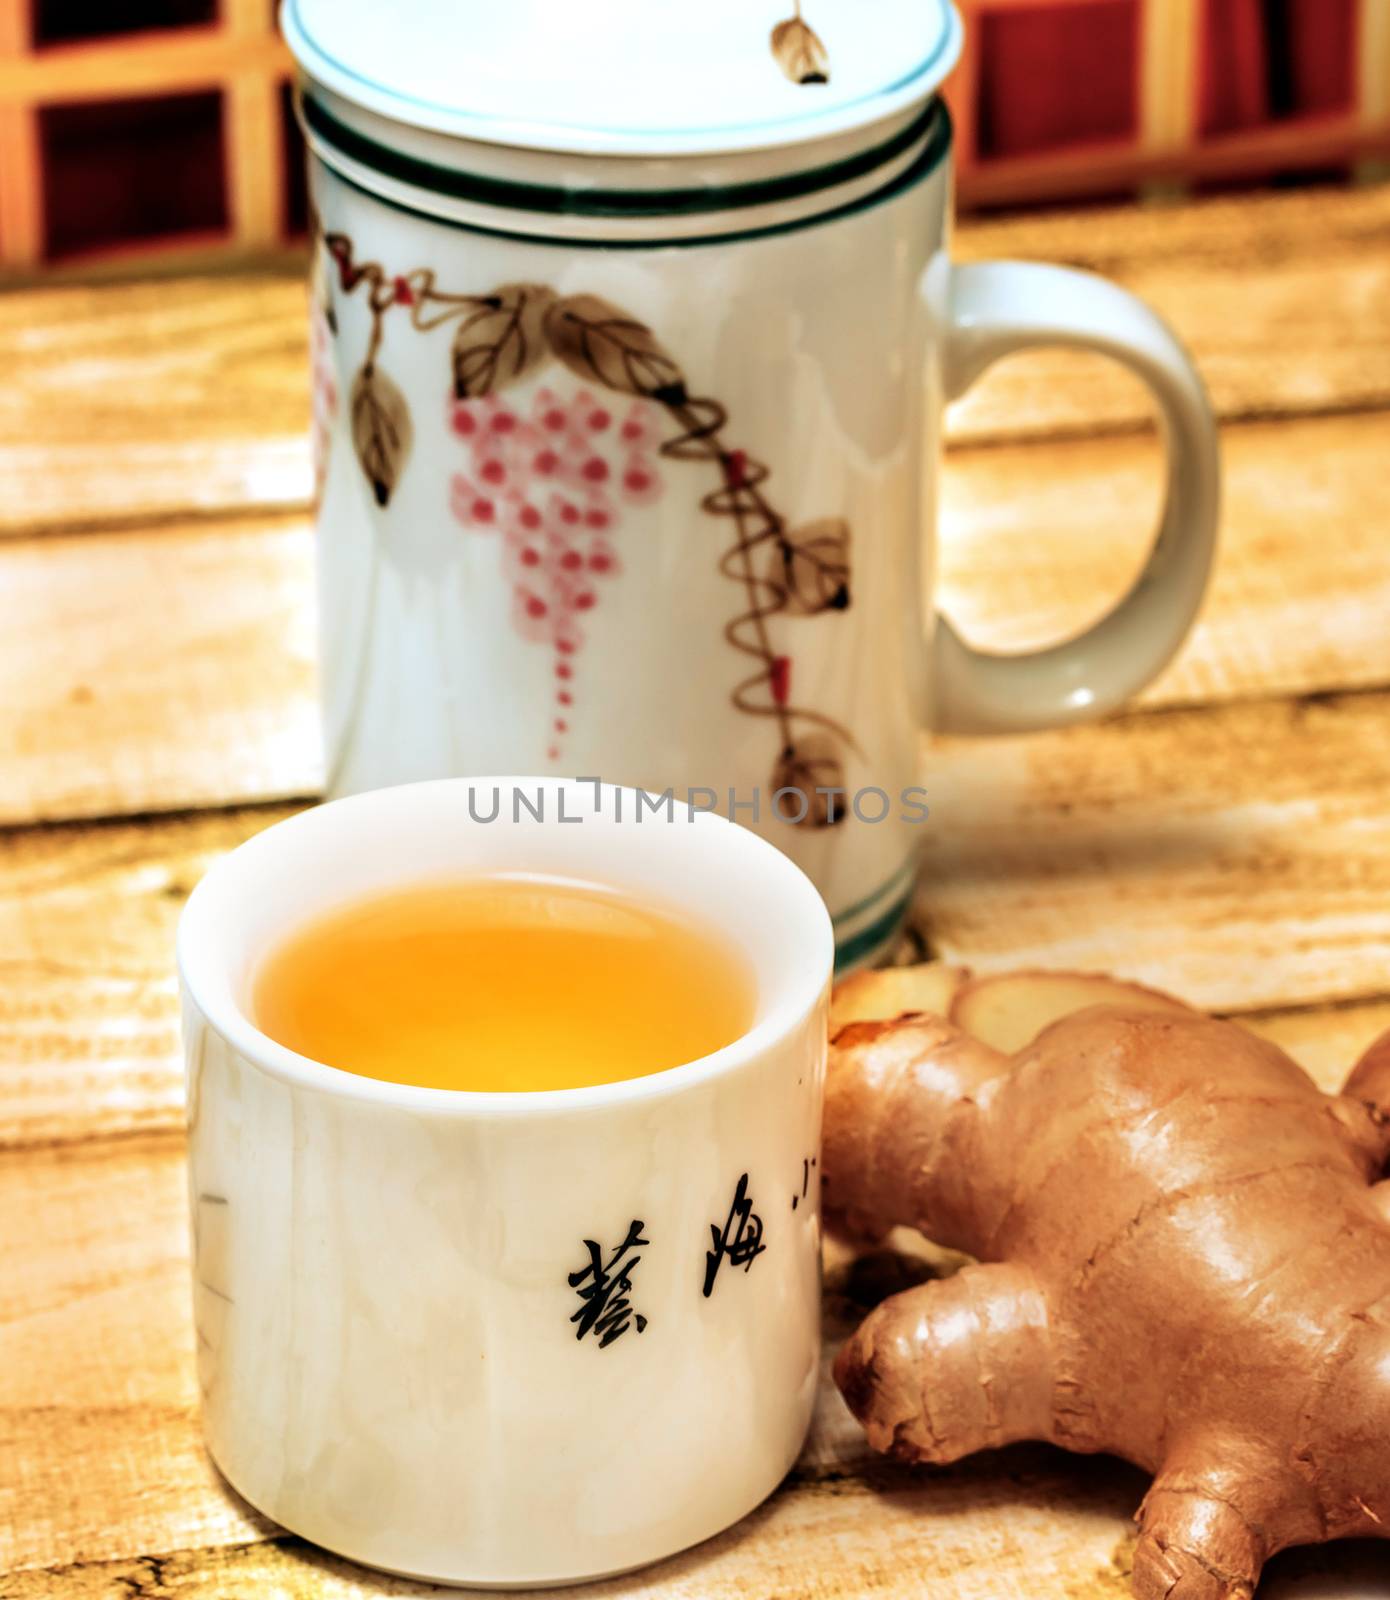 Japanese Ginger Tea Showing Teacup Drink And Teas